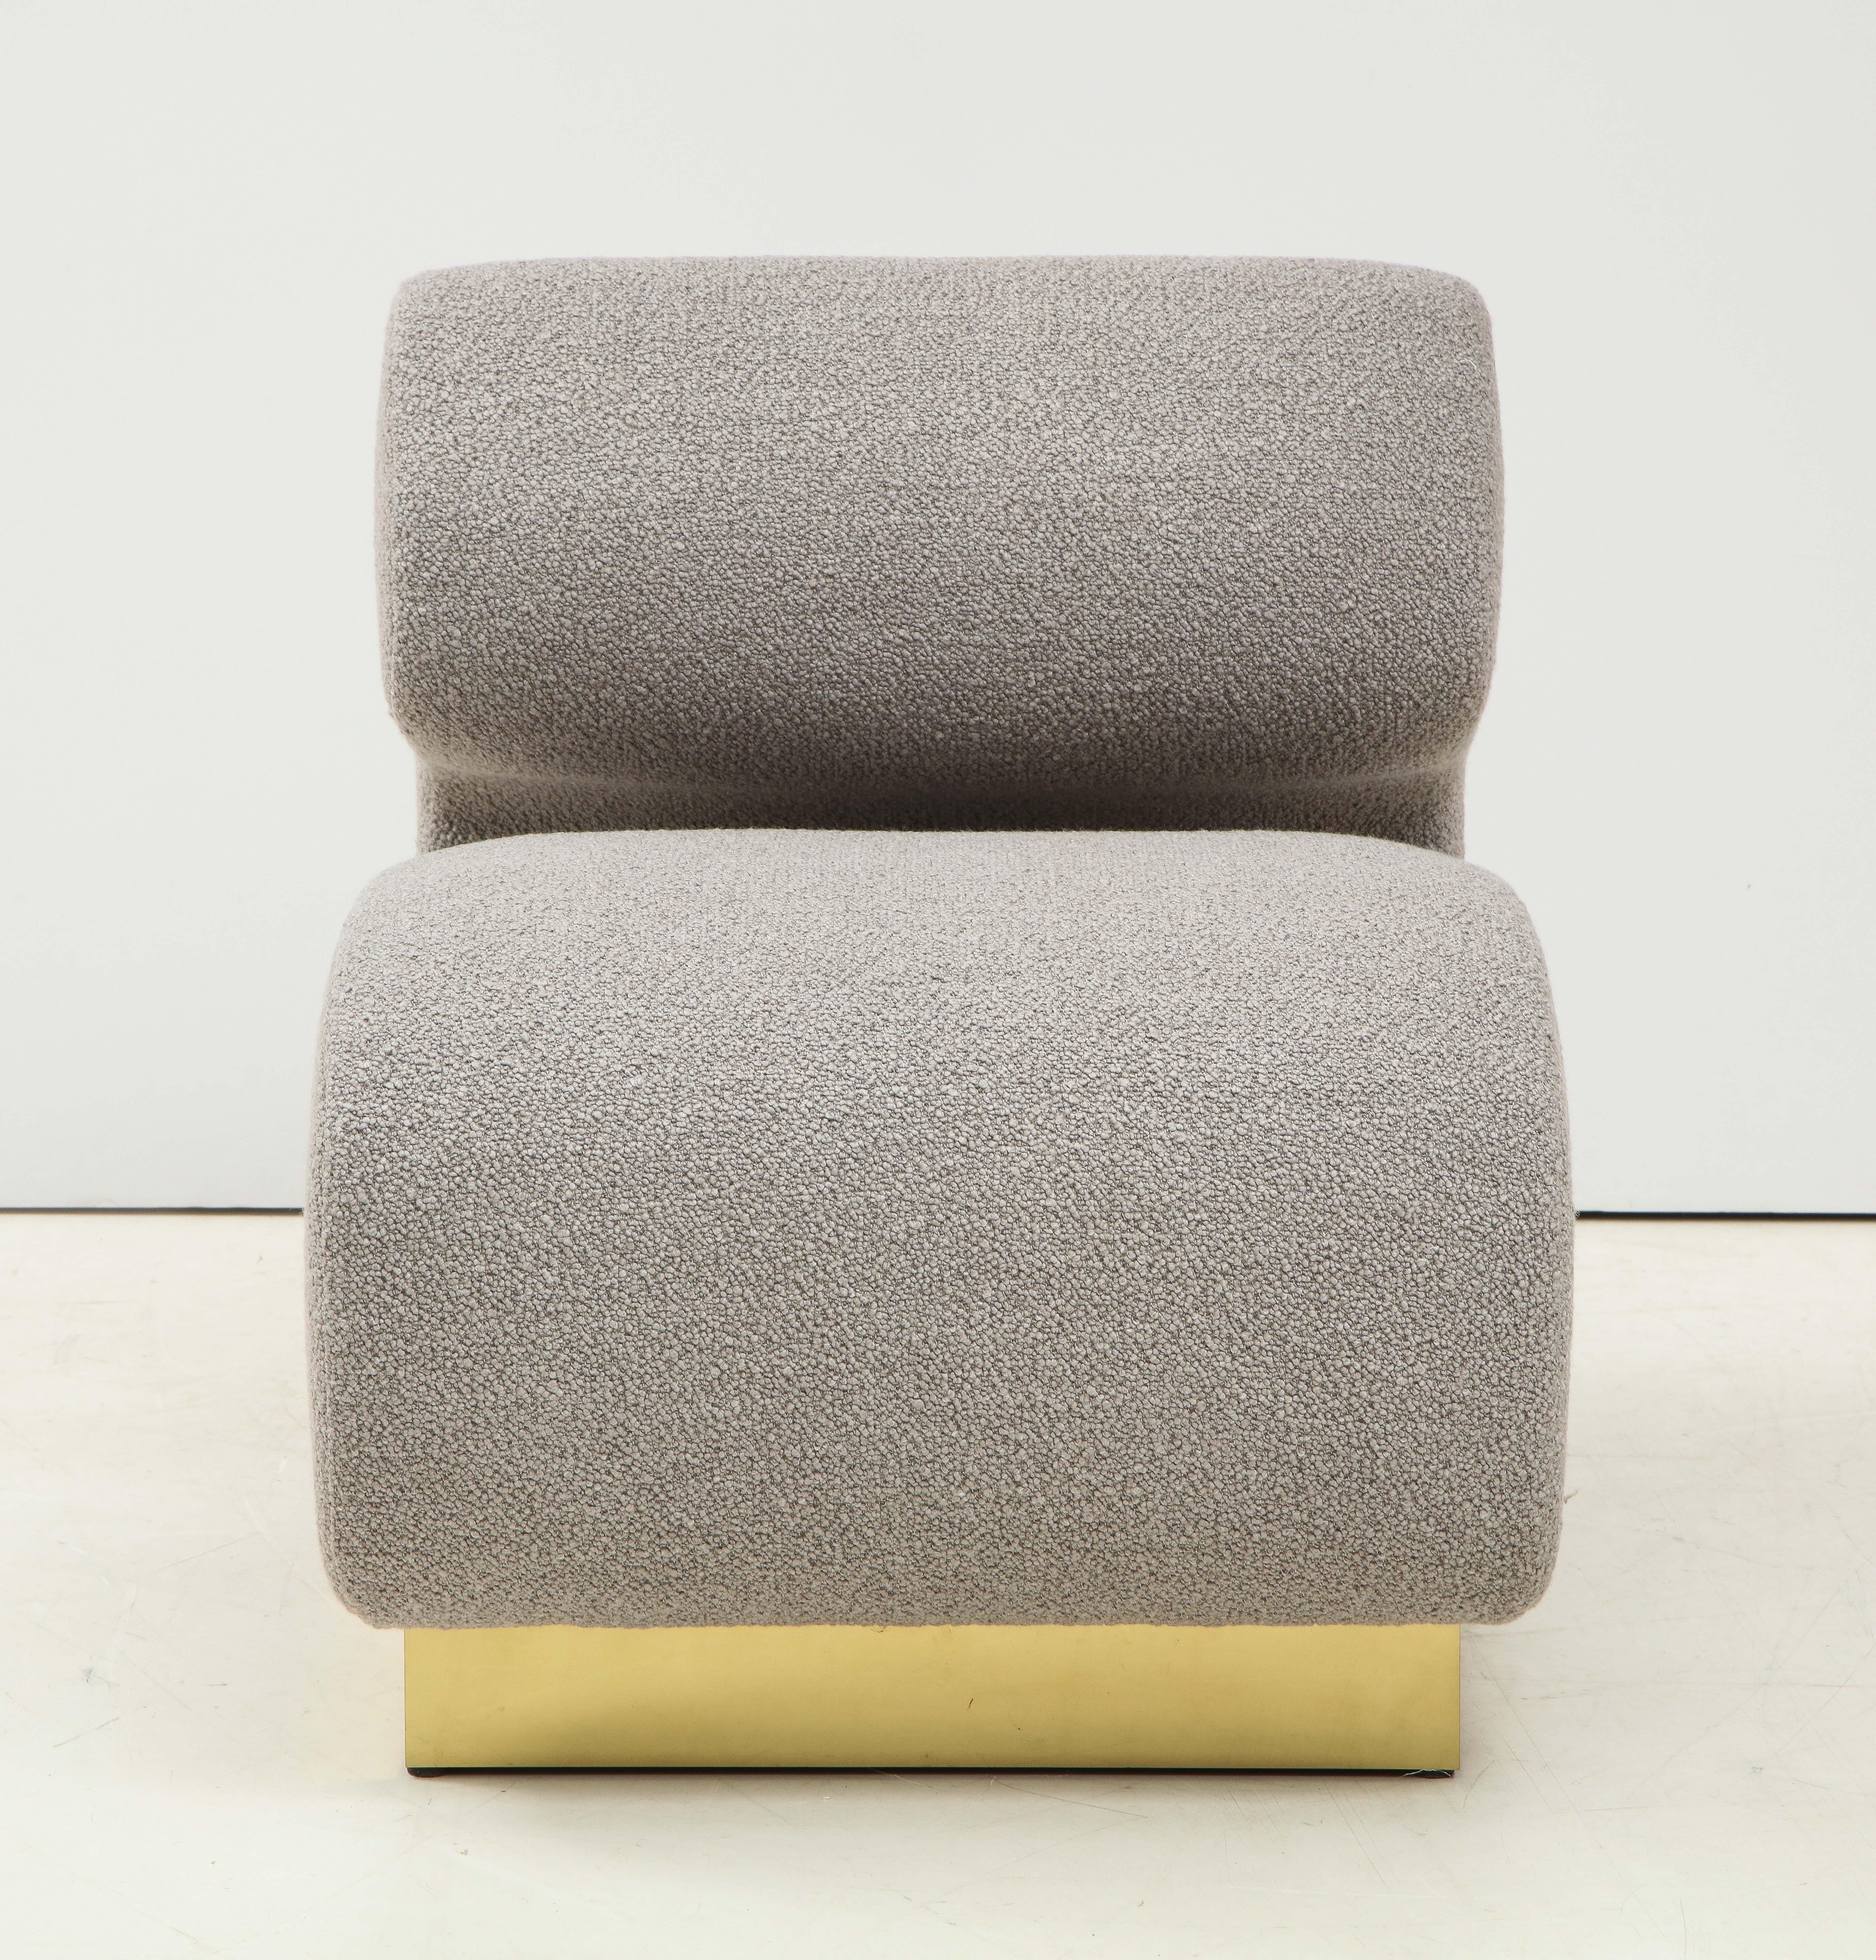 Pair of Sculptural Lounge Chairs in Grey Bouclé Fabric and Brass Base, Italy 2